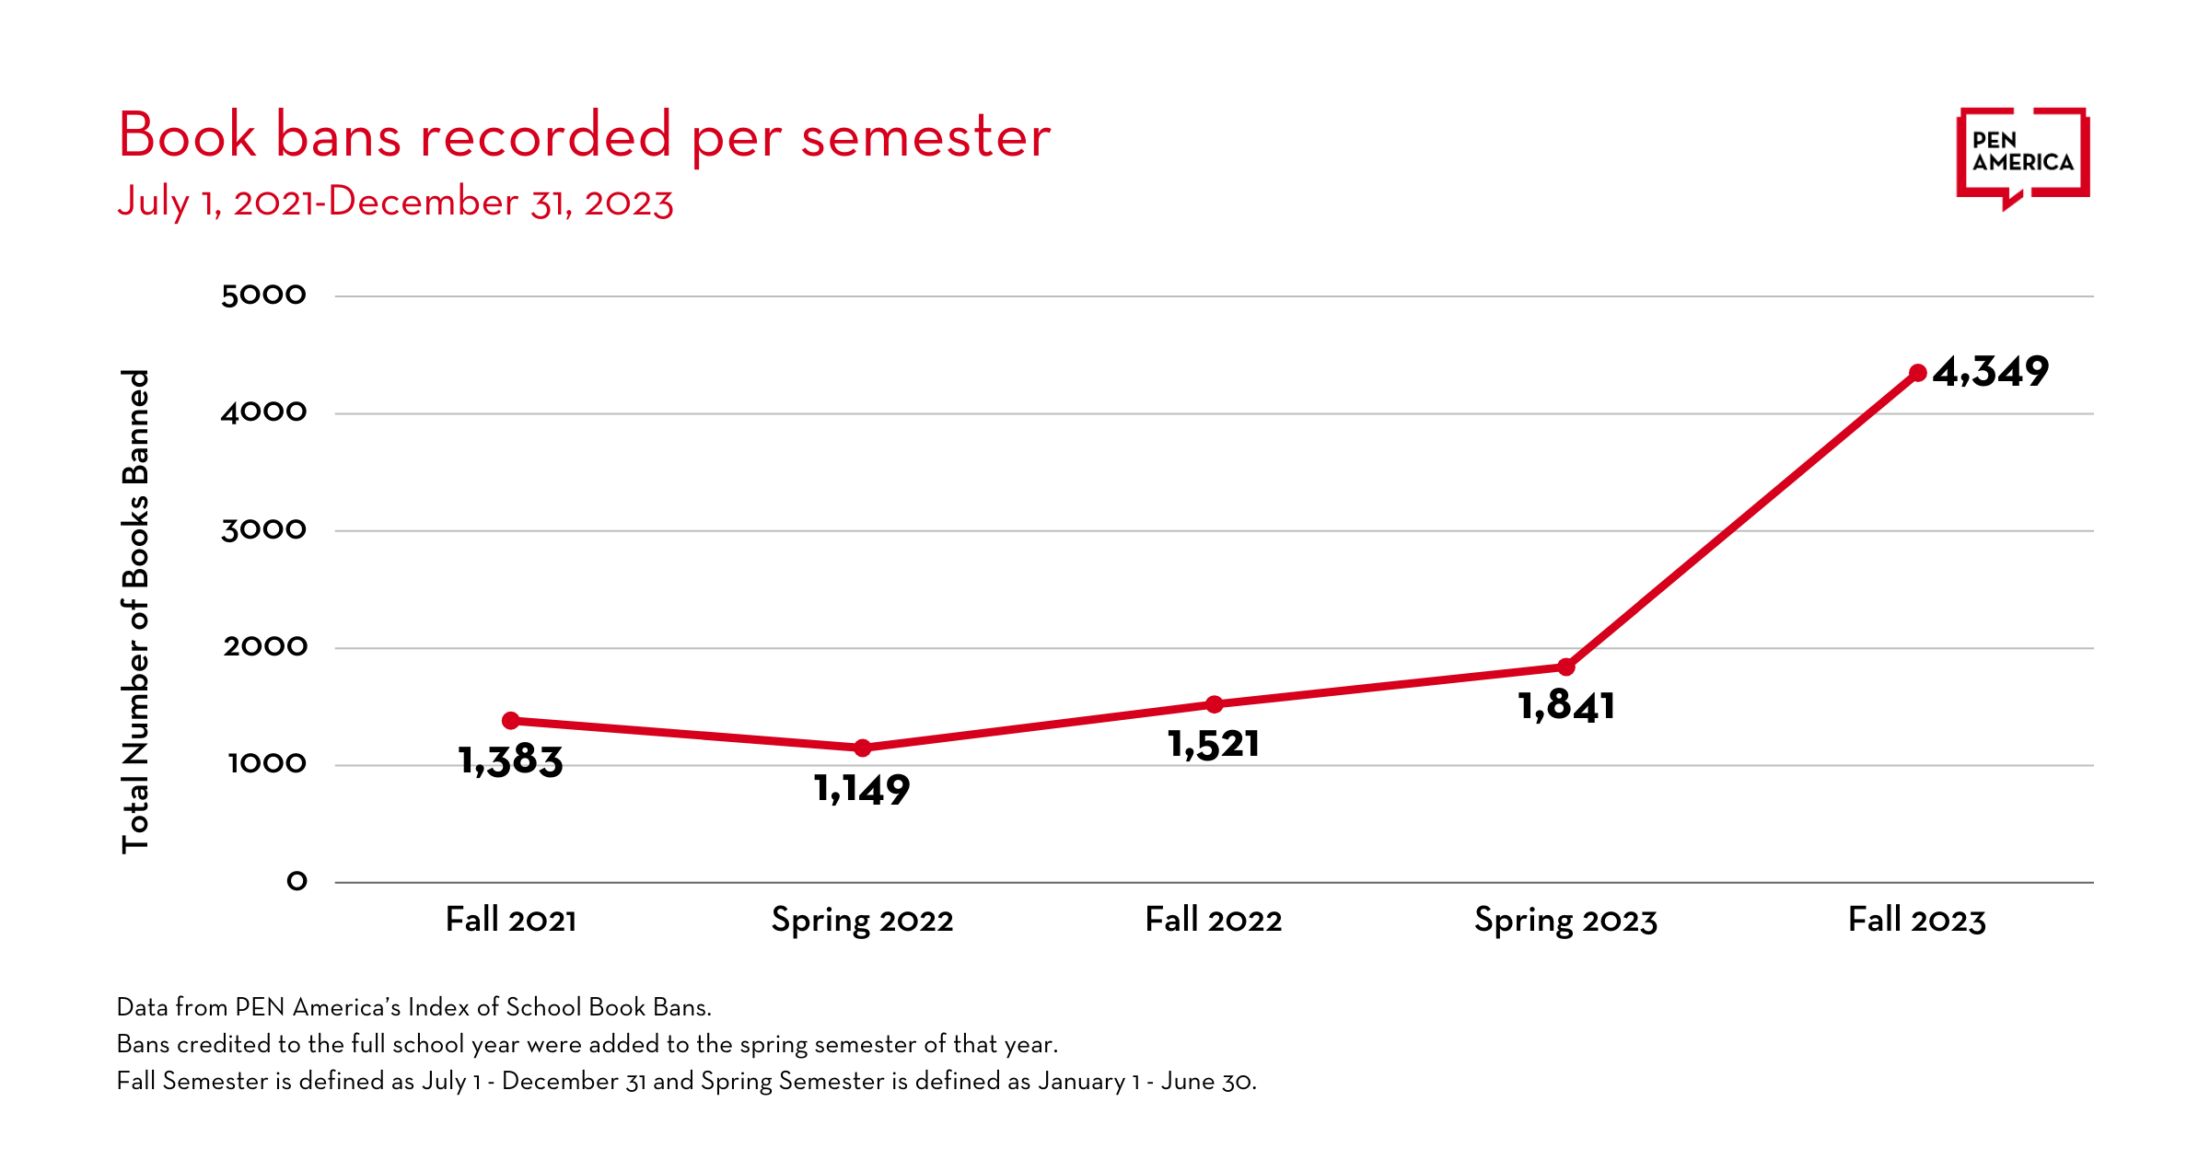 A red line chart trending upward on a white background. The y axis is "Total number of books banned" from 0 to 5,000 marked by each 1,000; the x axis is by semester: Fall 2021, Spring 2022, Fall 2022, Spring 2023, Fall 2023. The line graph follows: 1,383 for Fall 2021; 1,149 for Spring 2022; 1,521 for Fall 2022; 1,841 for Spring 2023; 4,249 for Fall 2023. At the bottom of the graphic in tiny font is: Data from PEN America's Index of School Book Bans. Bans credited to the full school year were added to the spring semester of that year. Fall Semester is defined as July 1-December 31 and Spring Semester is defined as January 1-June 30.